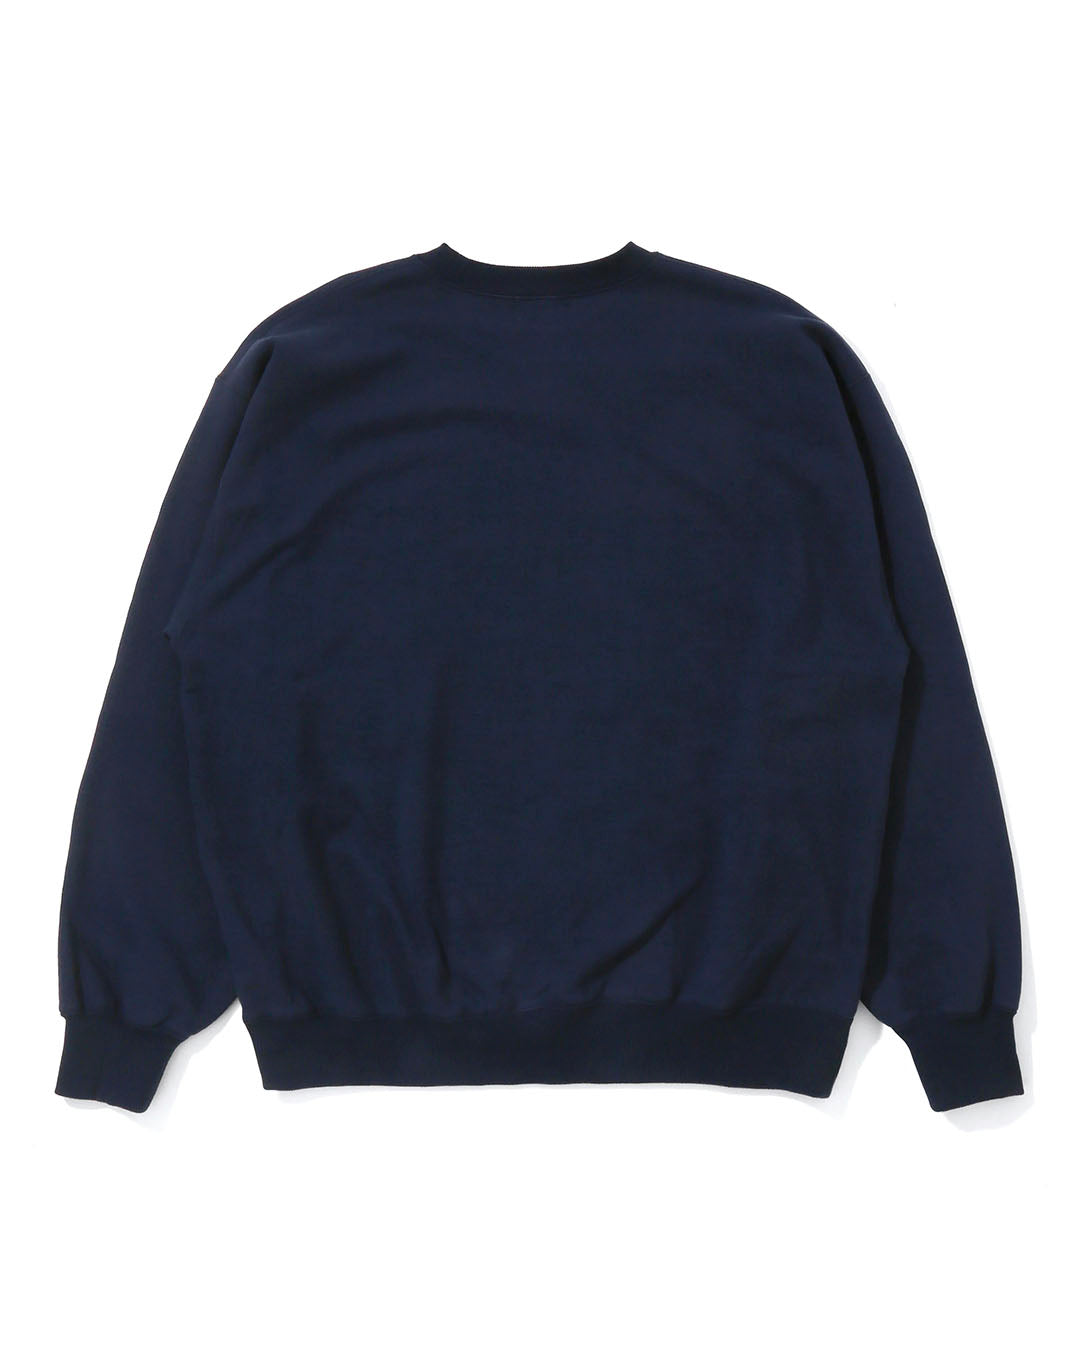 【CITY COUNTRY CITY】COTTON SWEAT SHIRT COLLEGE LOGO - NAVY